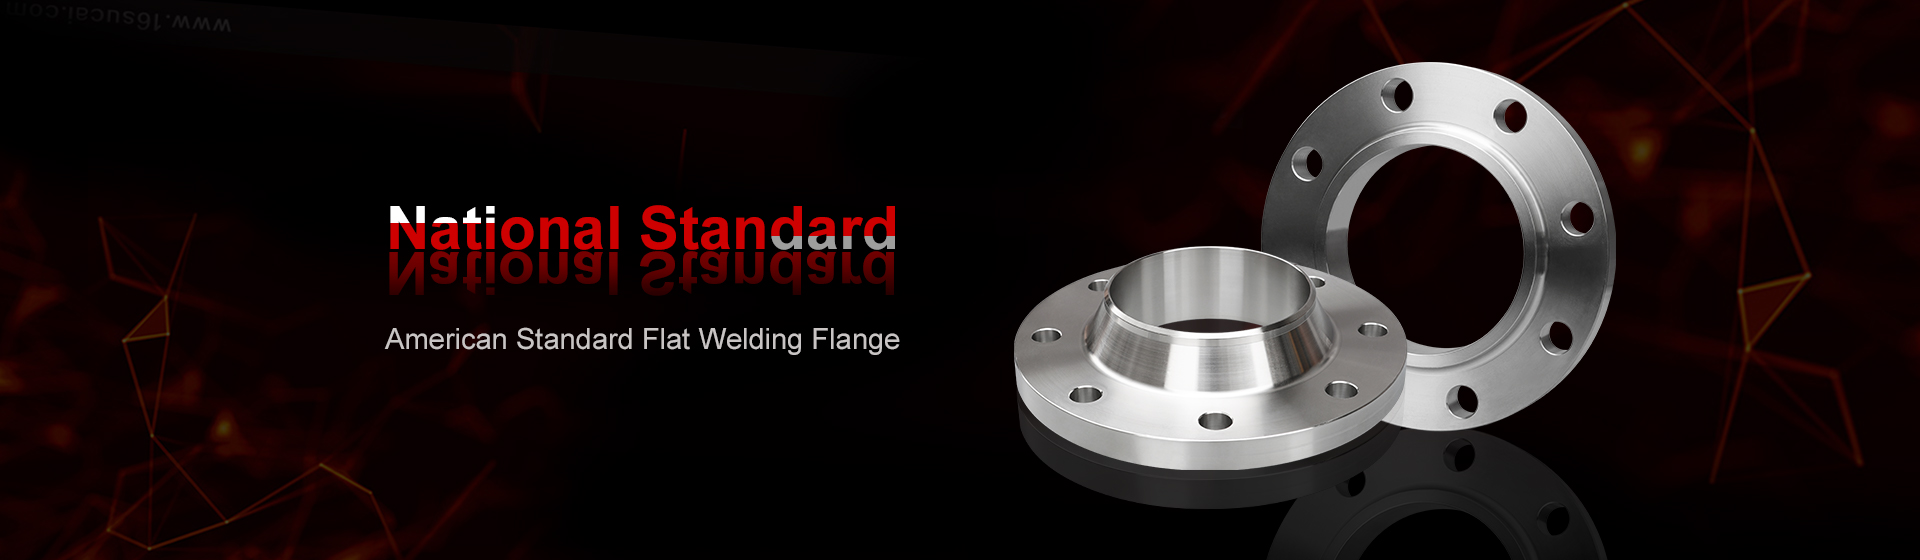 CHINA·SNGONG FLANGE MANUFACTURING CO., LTD.